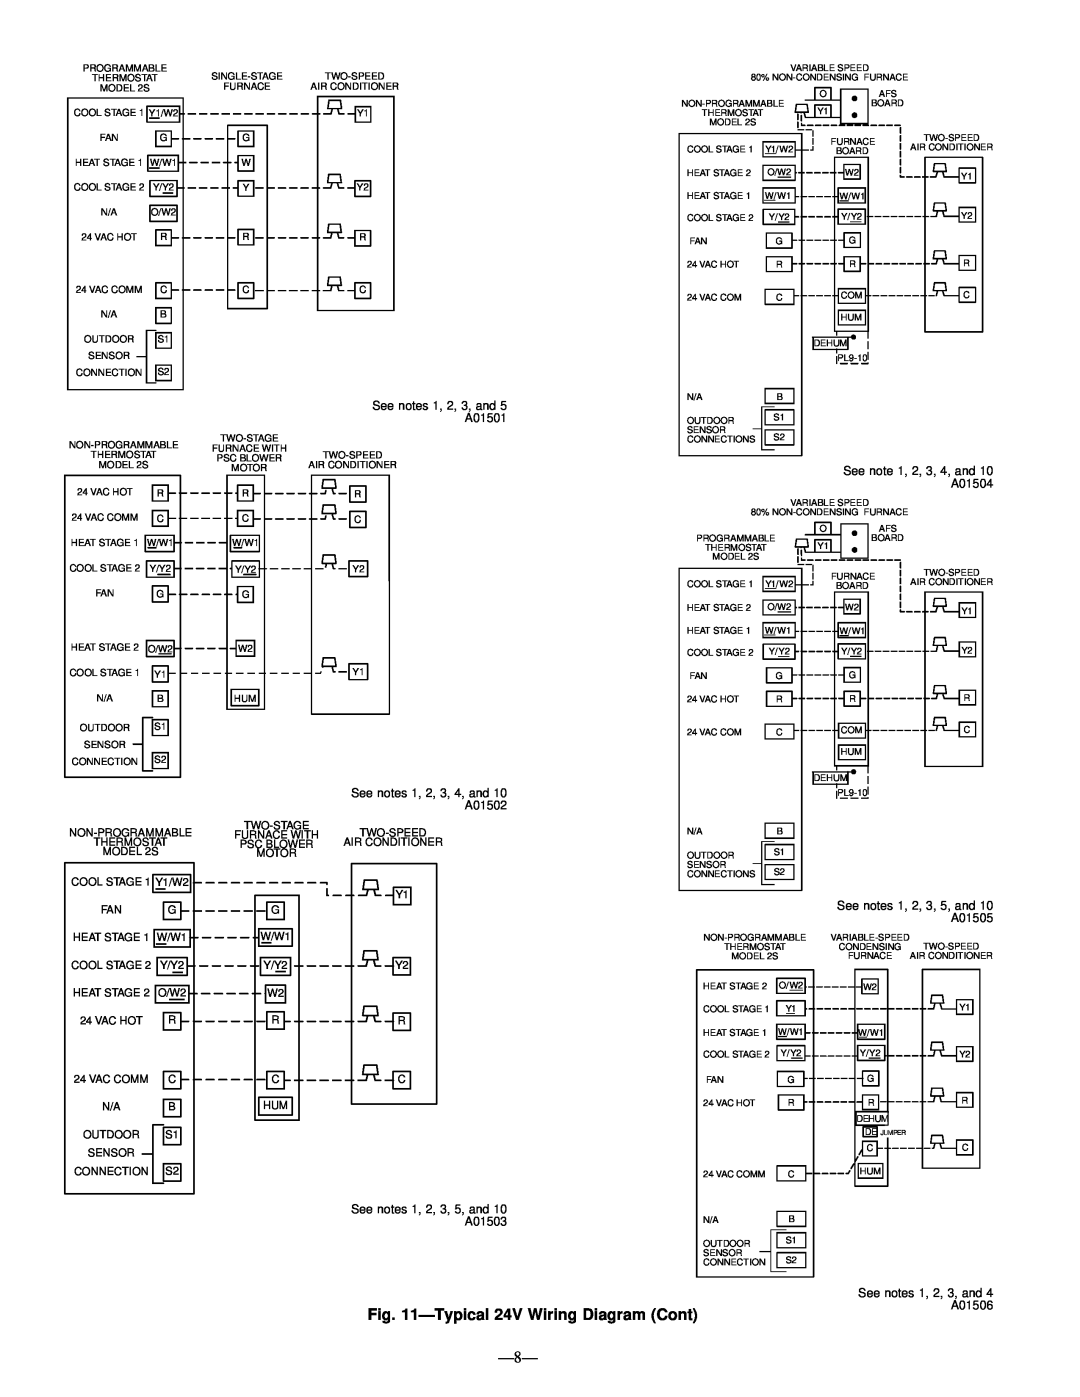 Bryant 598B Typical 24V Wiring Diagram Cont, See notes 1, 2, 3, and, A01501, See note 1, 2, 3, 4, and A01504, A01502 